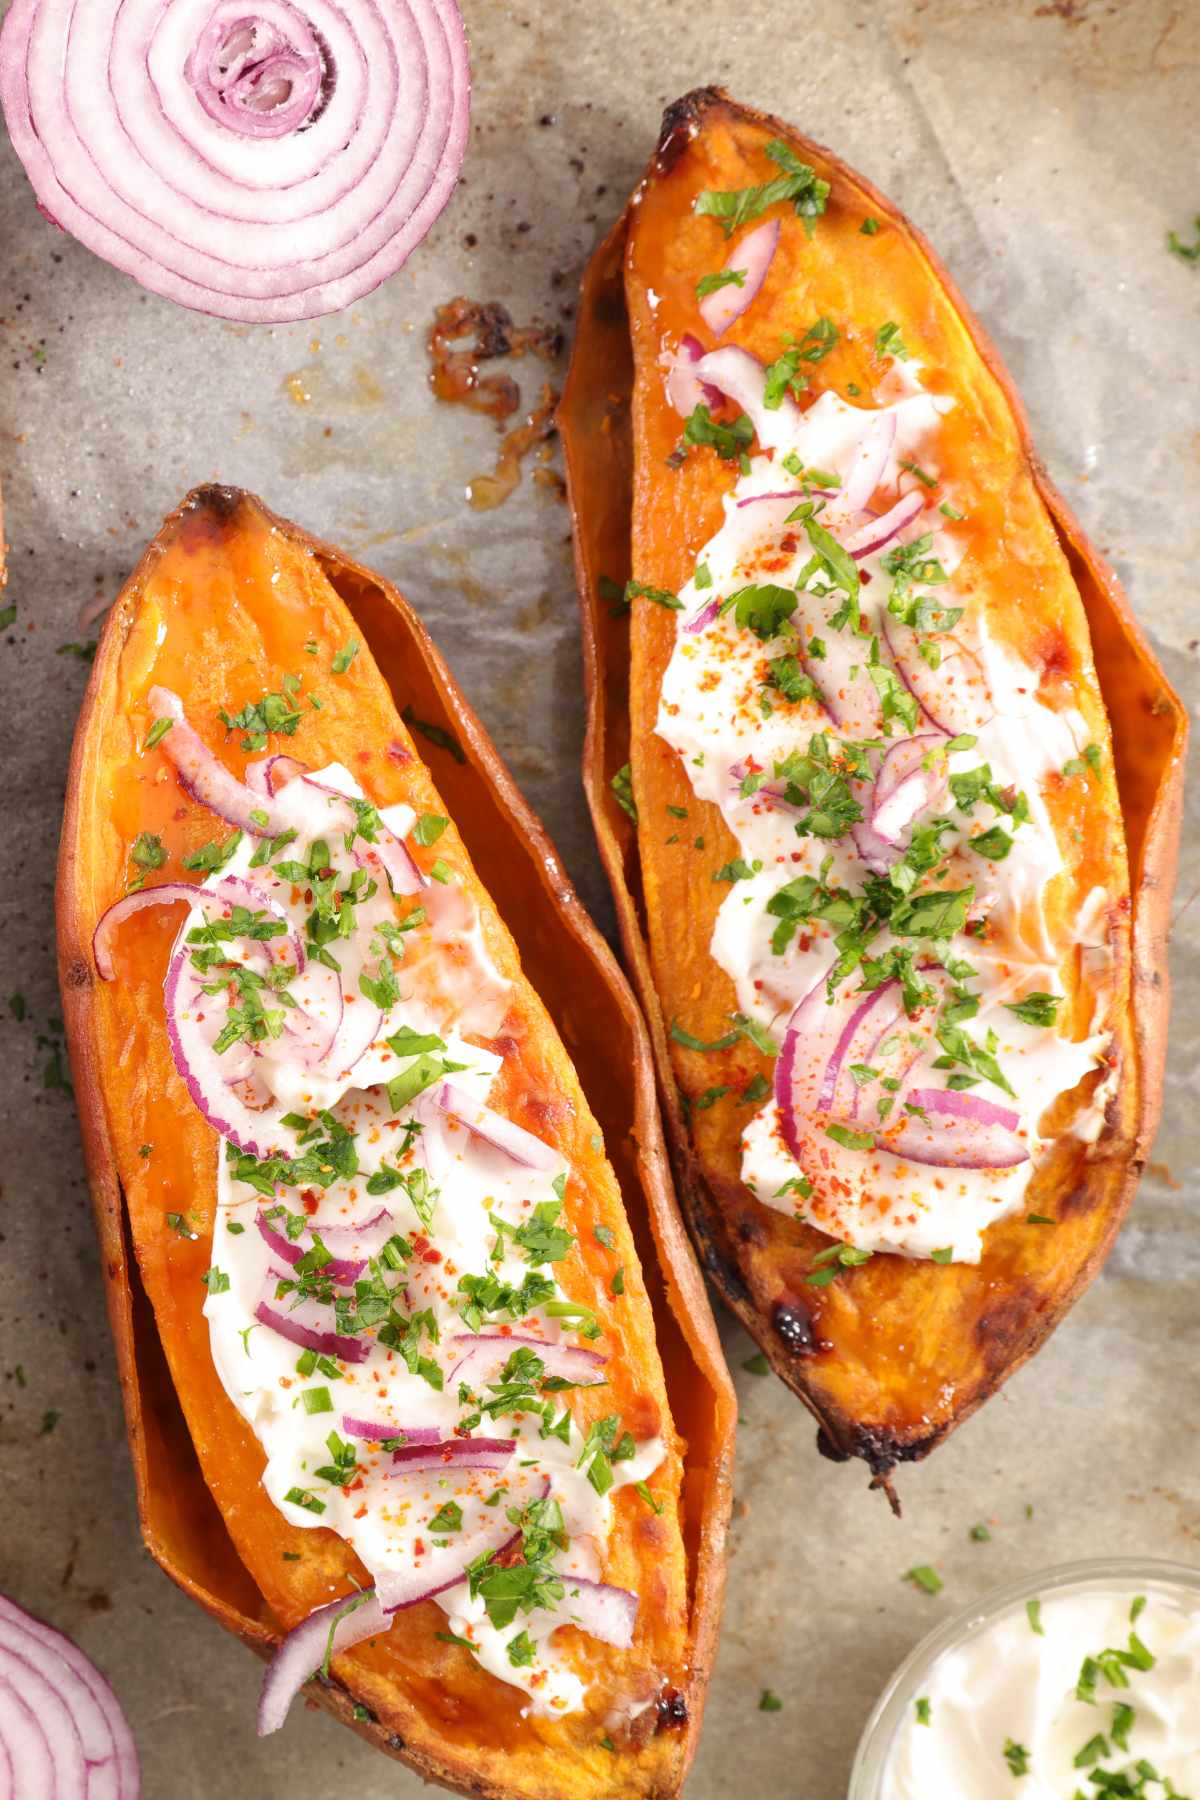 Oven roasted sweet potatoes are undeniably delicious. When done just right, they’re nice and crispy on the outside with a soft, fluffy middle. Not sure about the best oven temp for sweet potatoes? Keep reading to learn how you can get perfectly roasted potatoes every time.